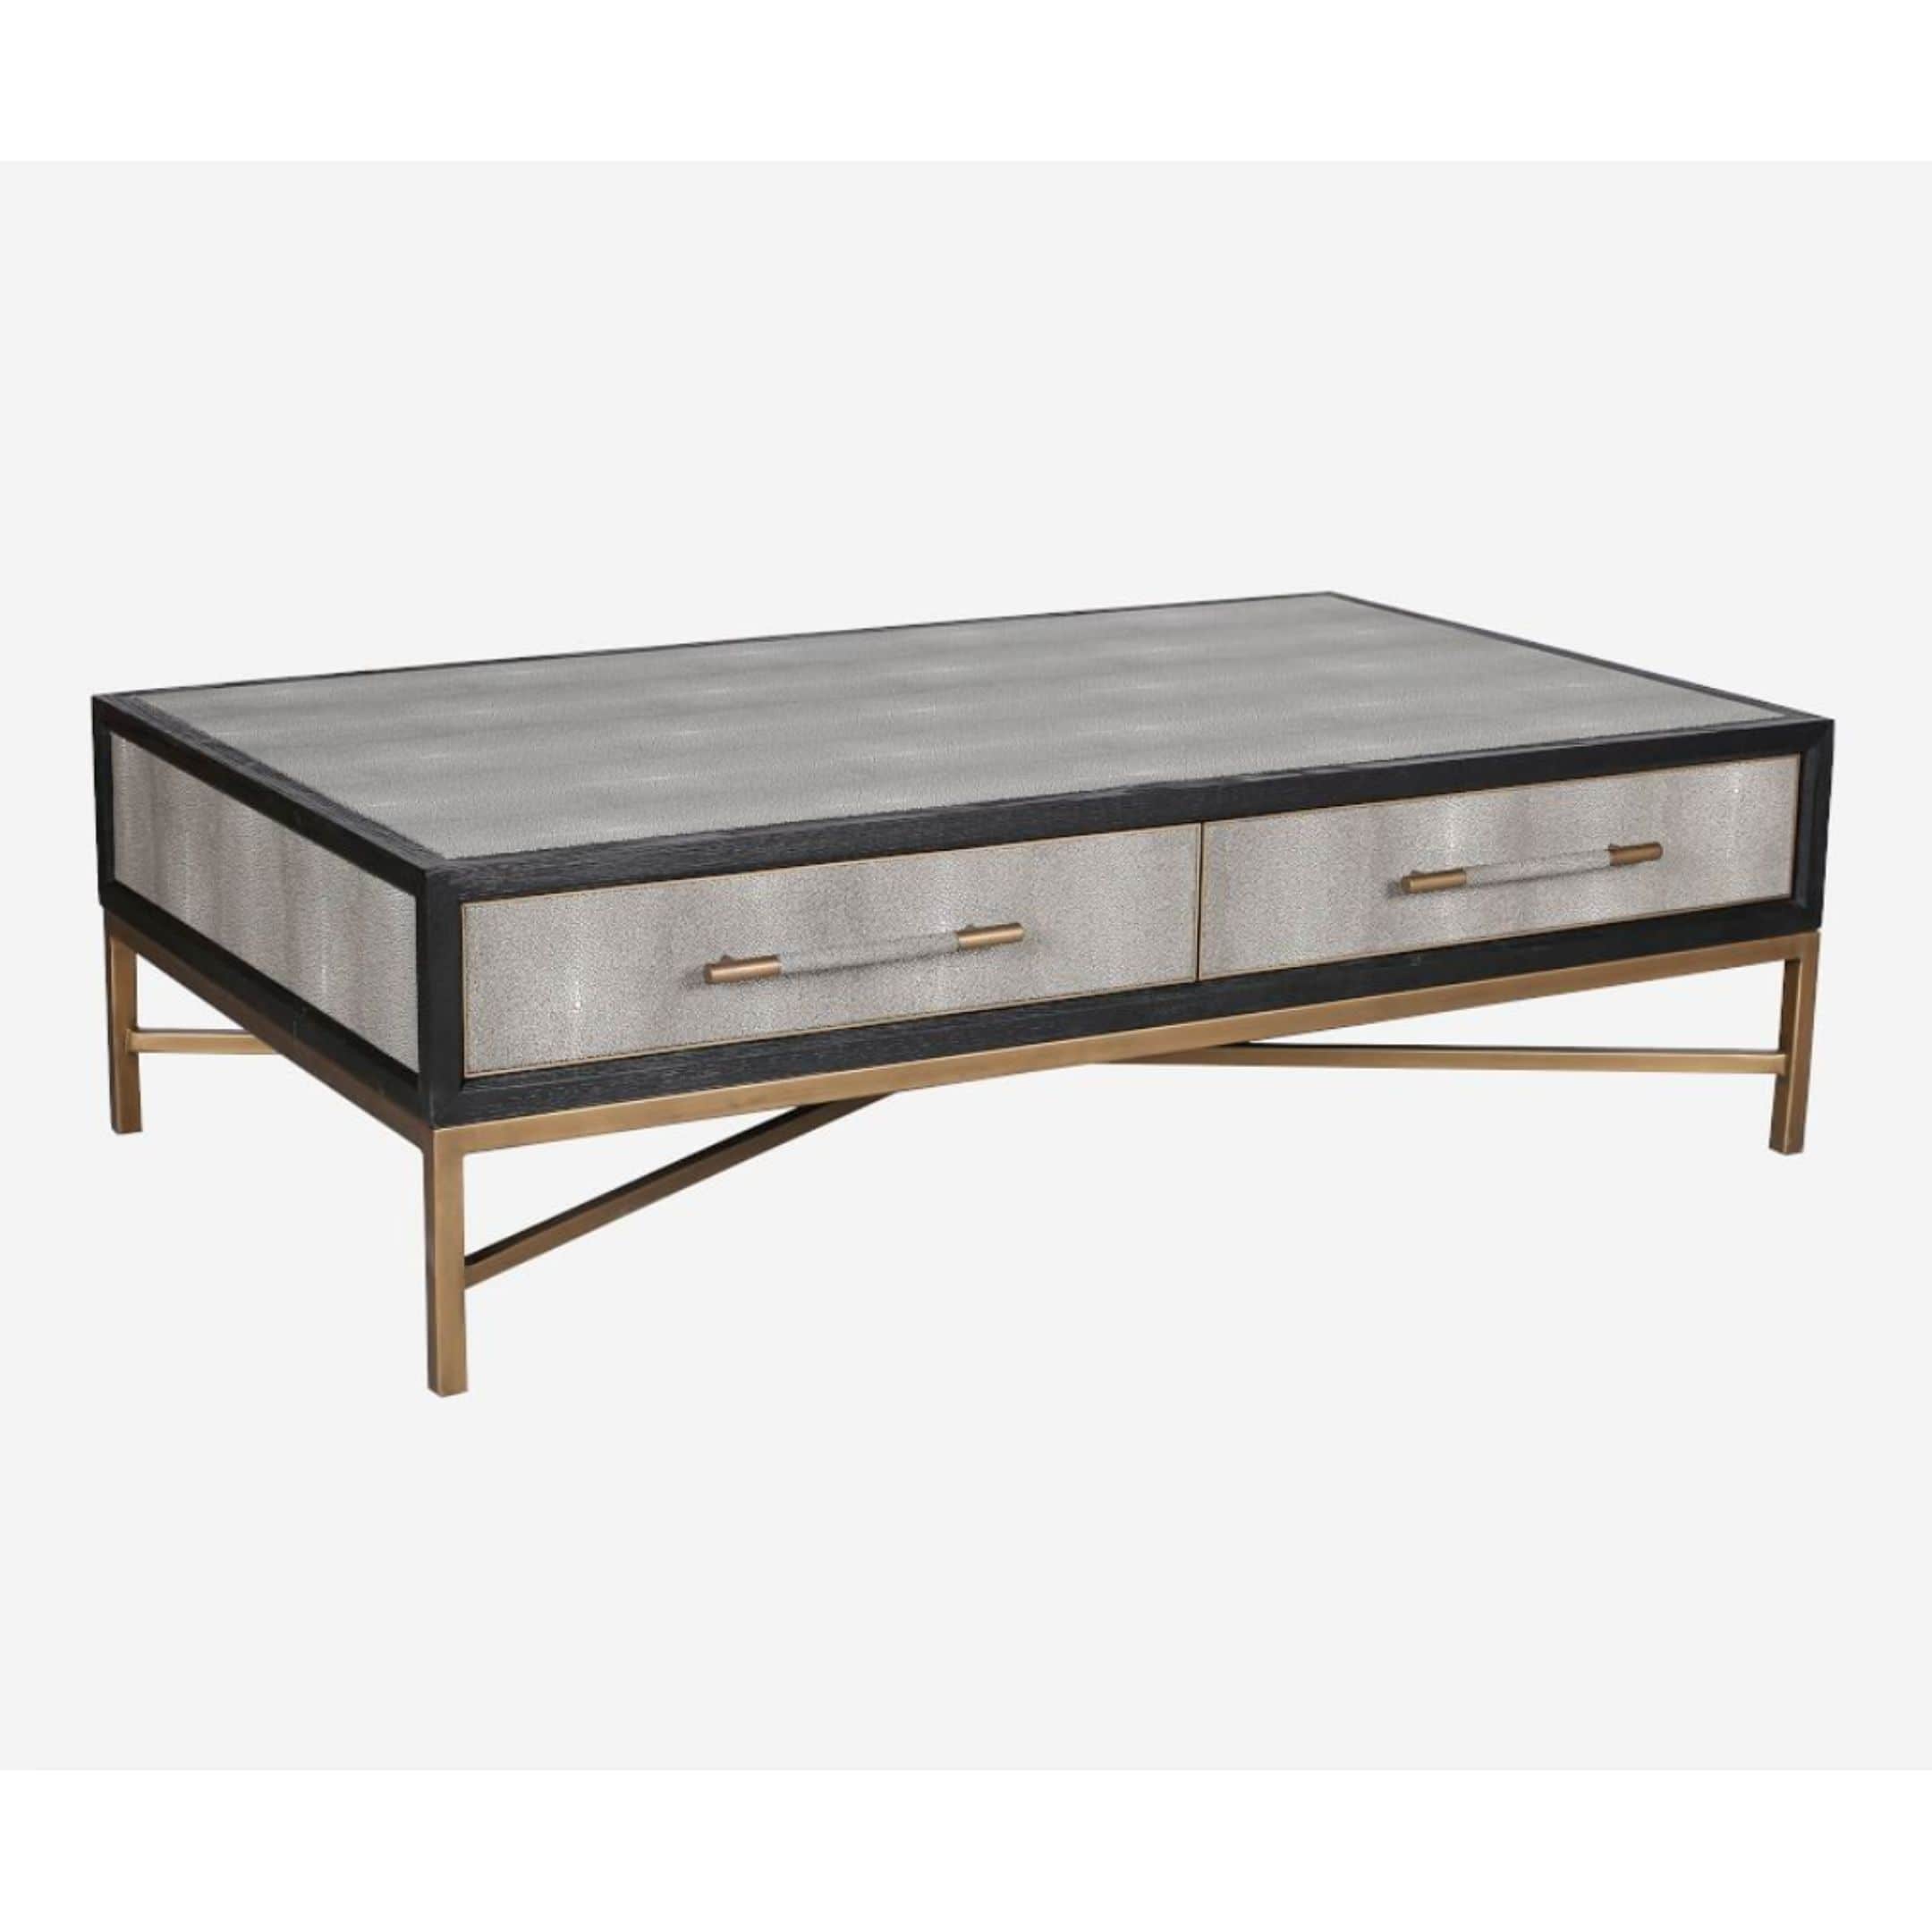 Pottery Barn coffee table with drawers and metal legs.